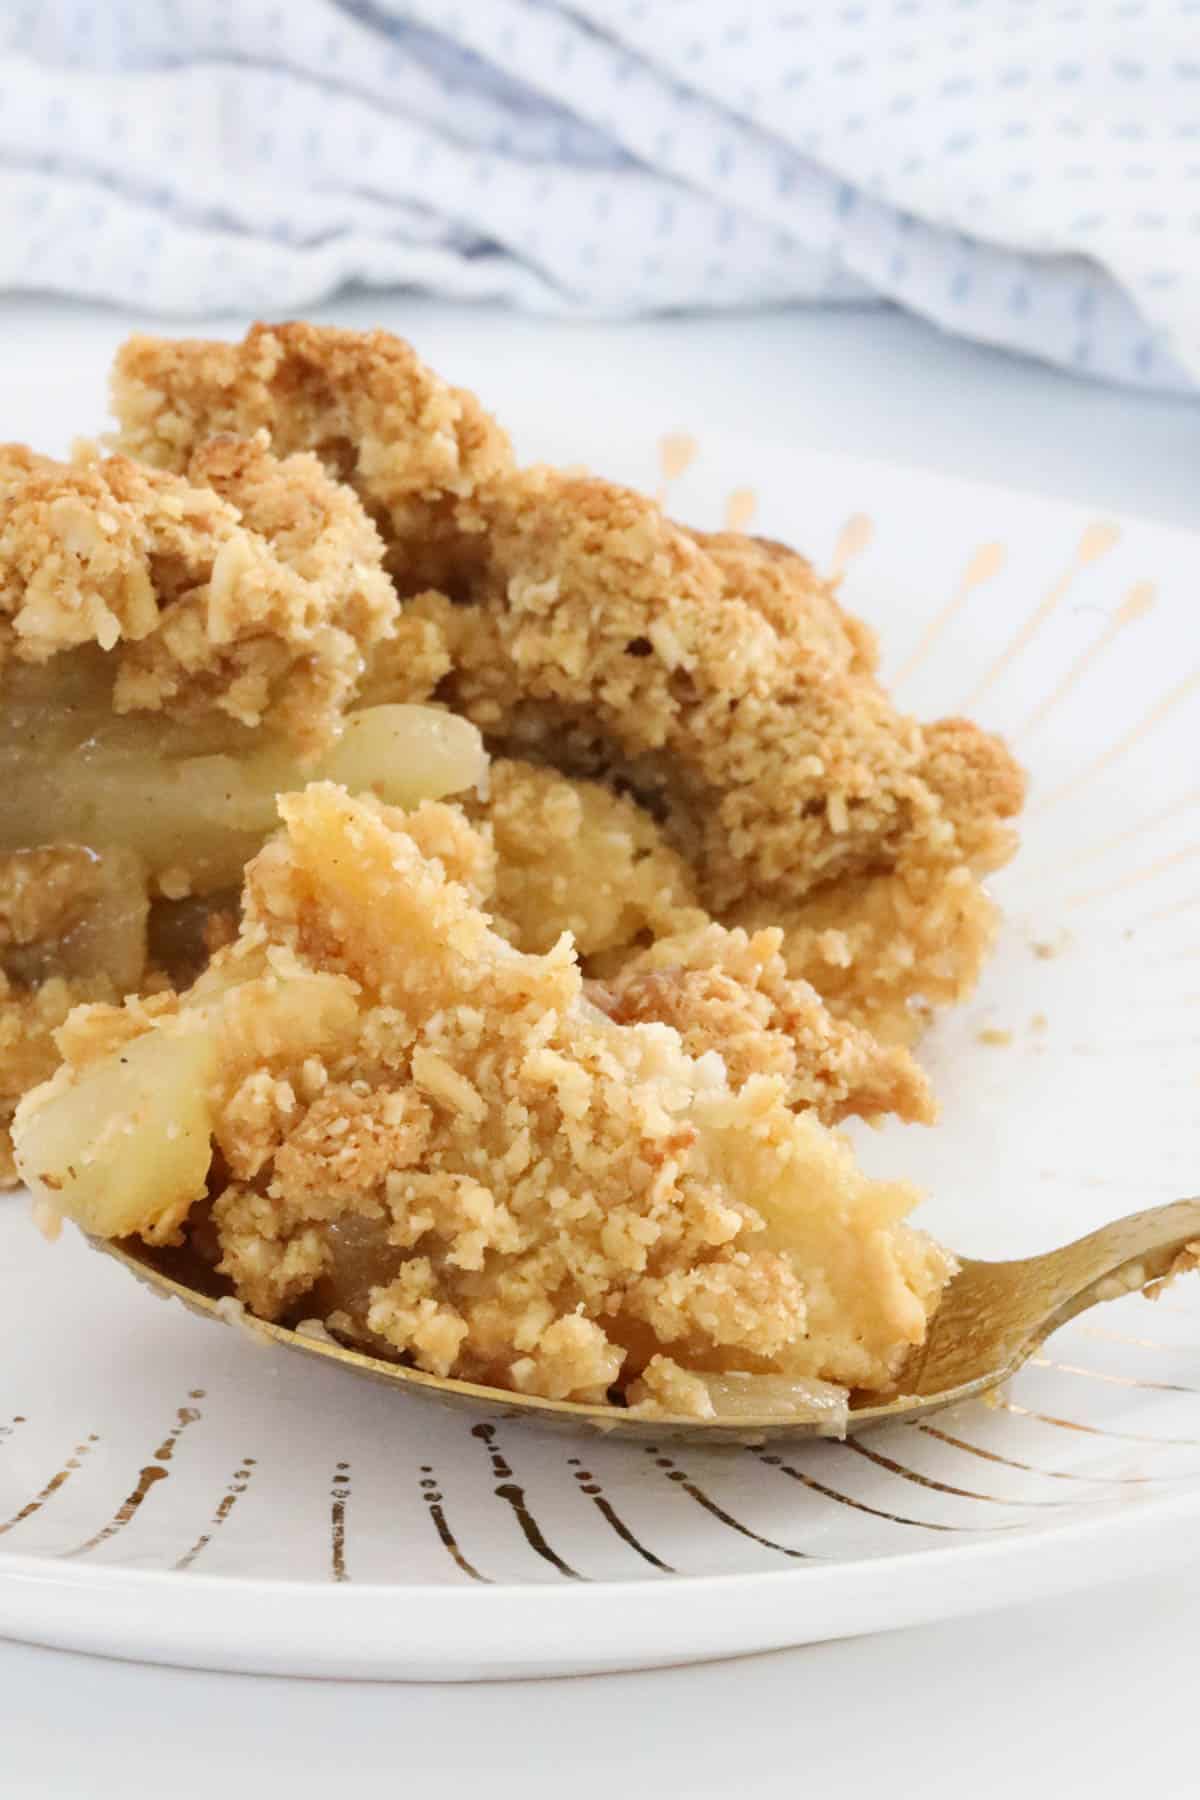 A gold patterned white plate with a spoonful of Apple Crumble resting on it